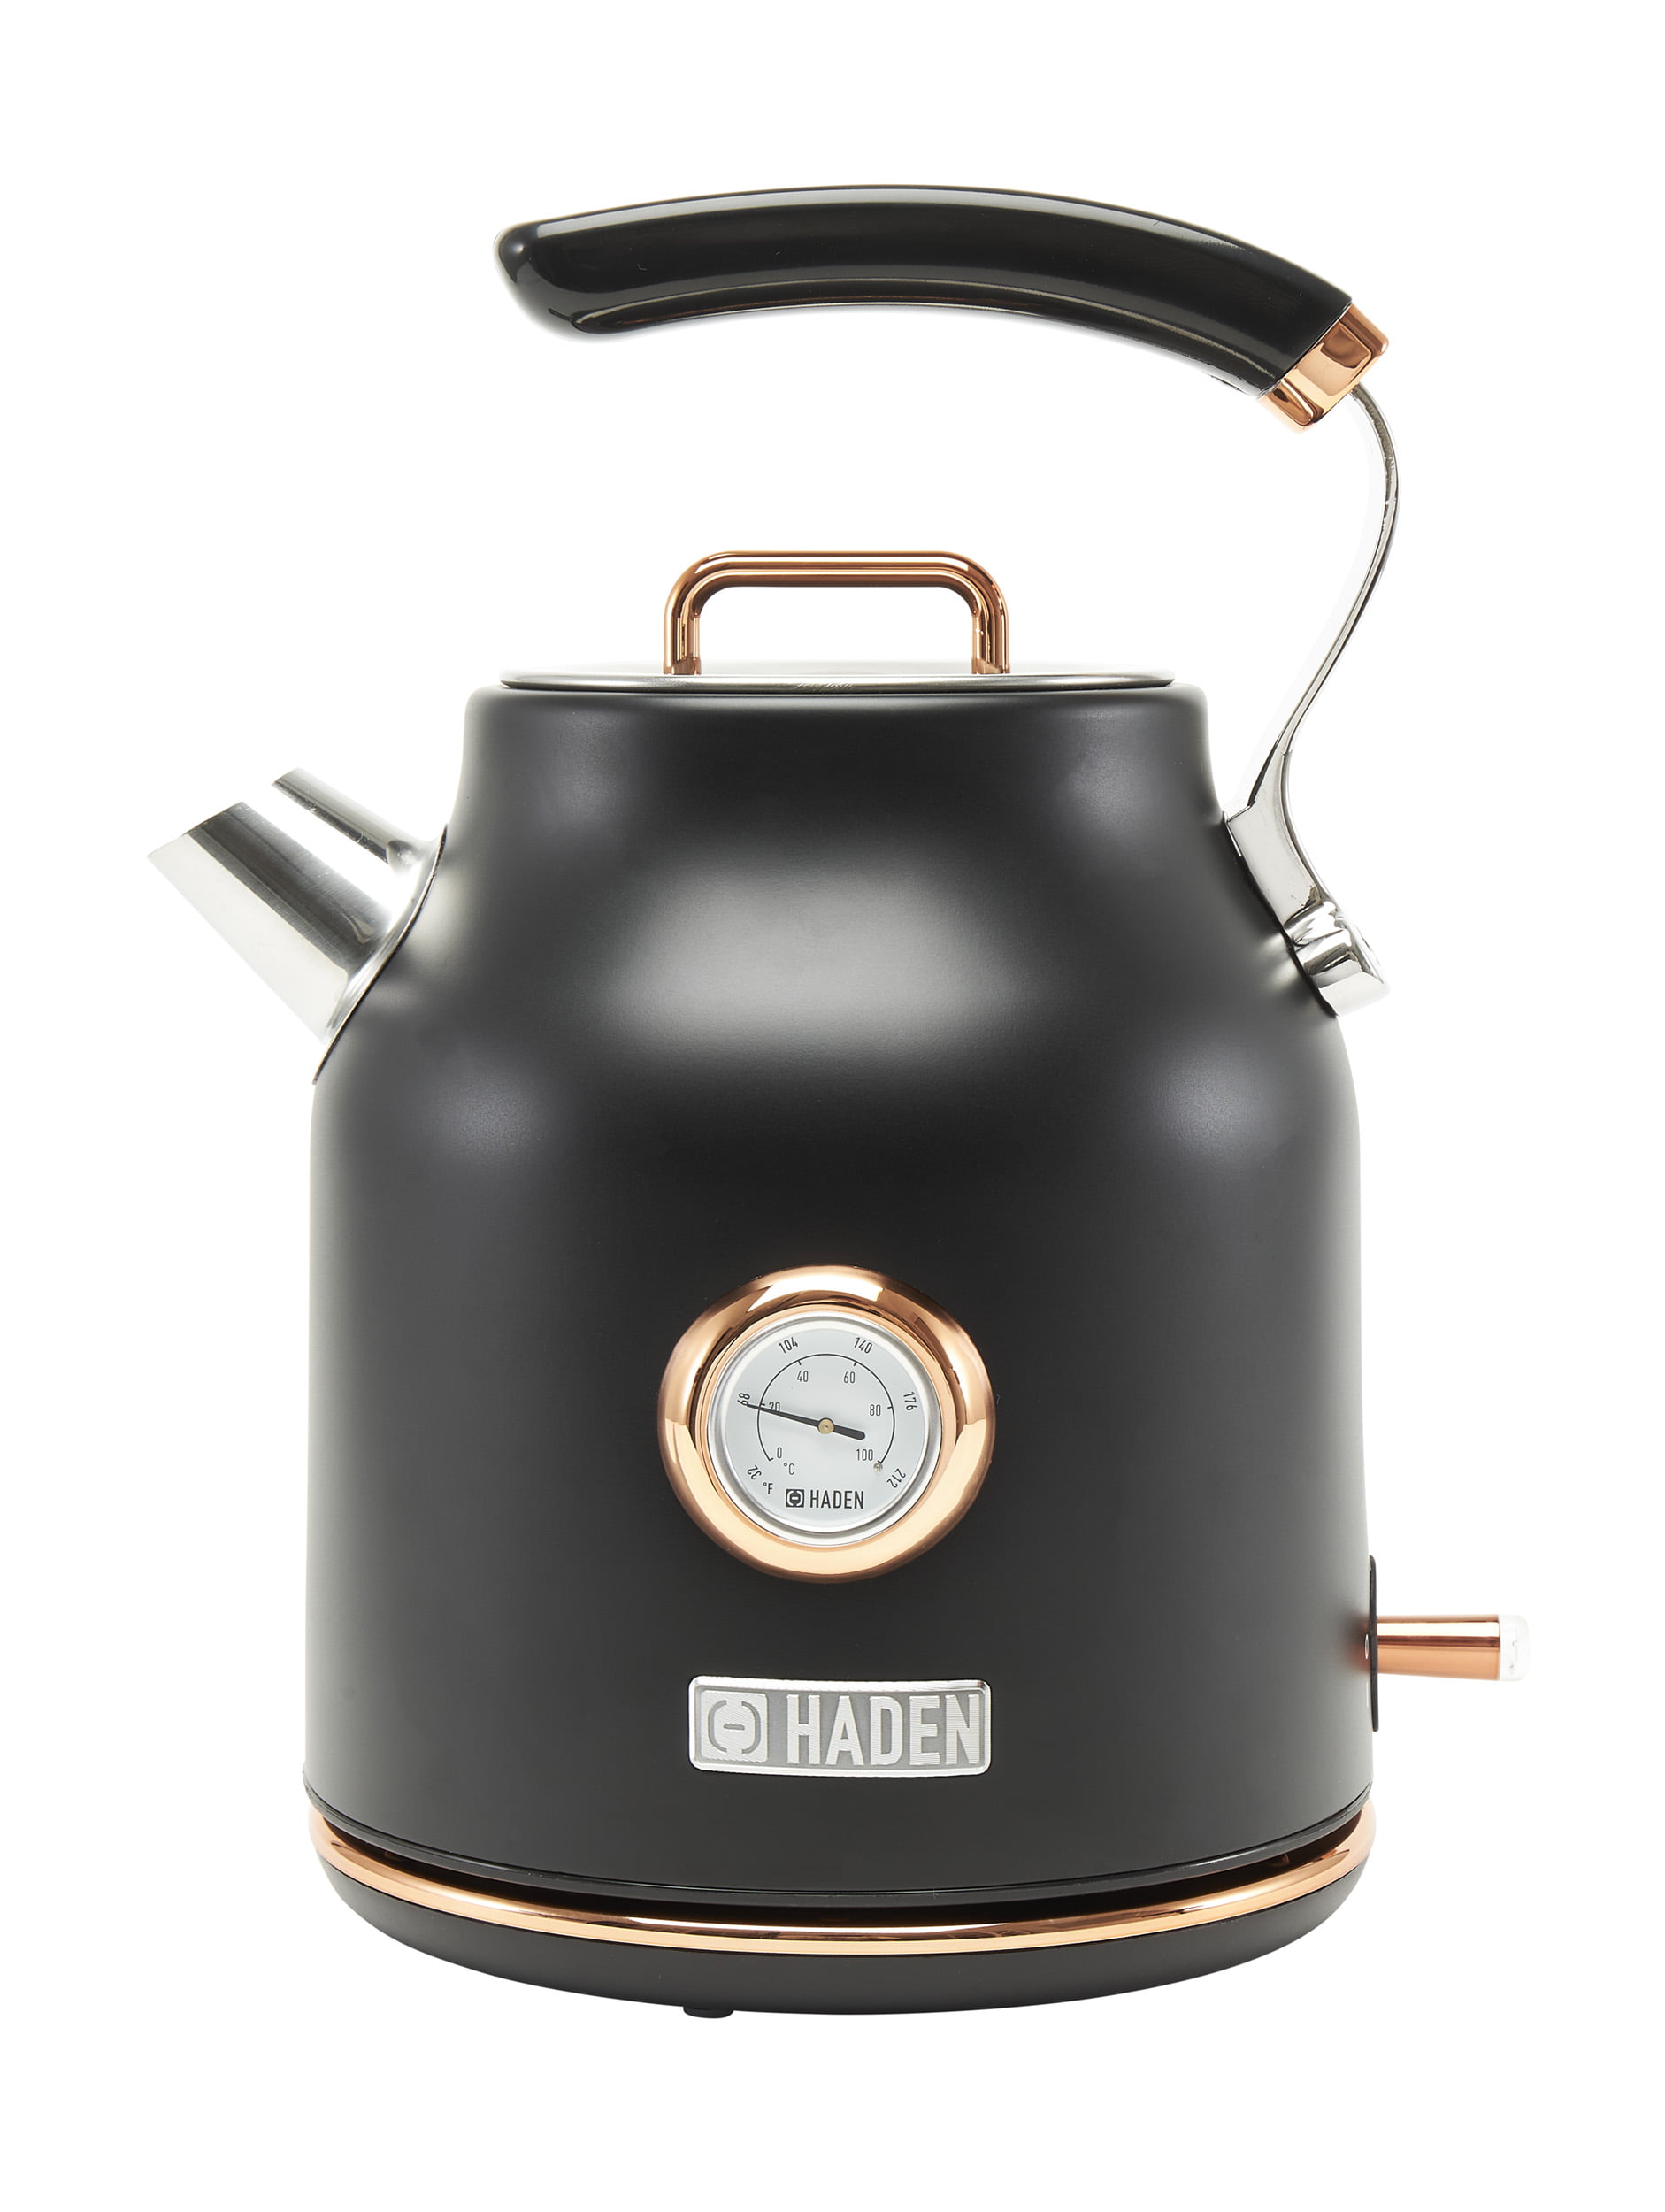  Haden 75041 Heritage 1.7 Liter (7 Cup) Stainless Steel Electric  Kettle with Auto Shut-Off and Boil Dry Protection, Black/Copper: Home &  Kitchen